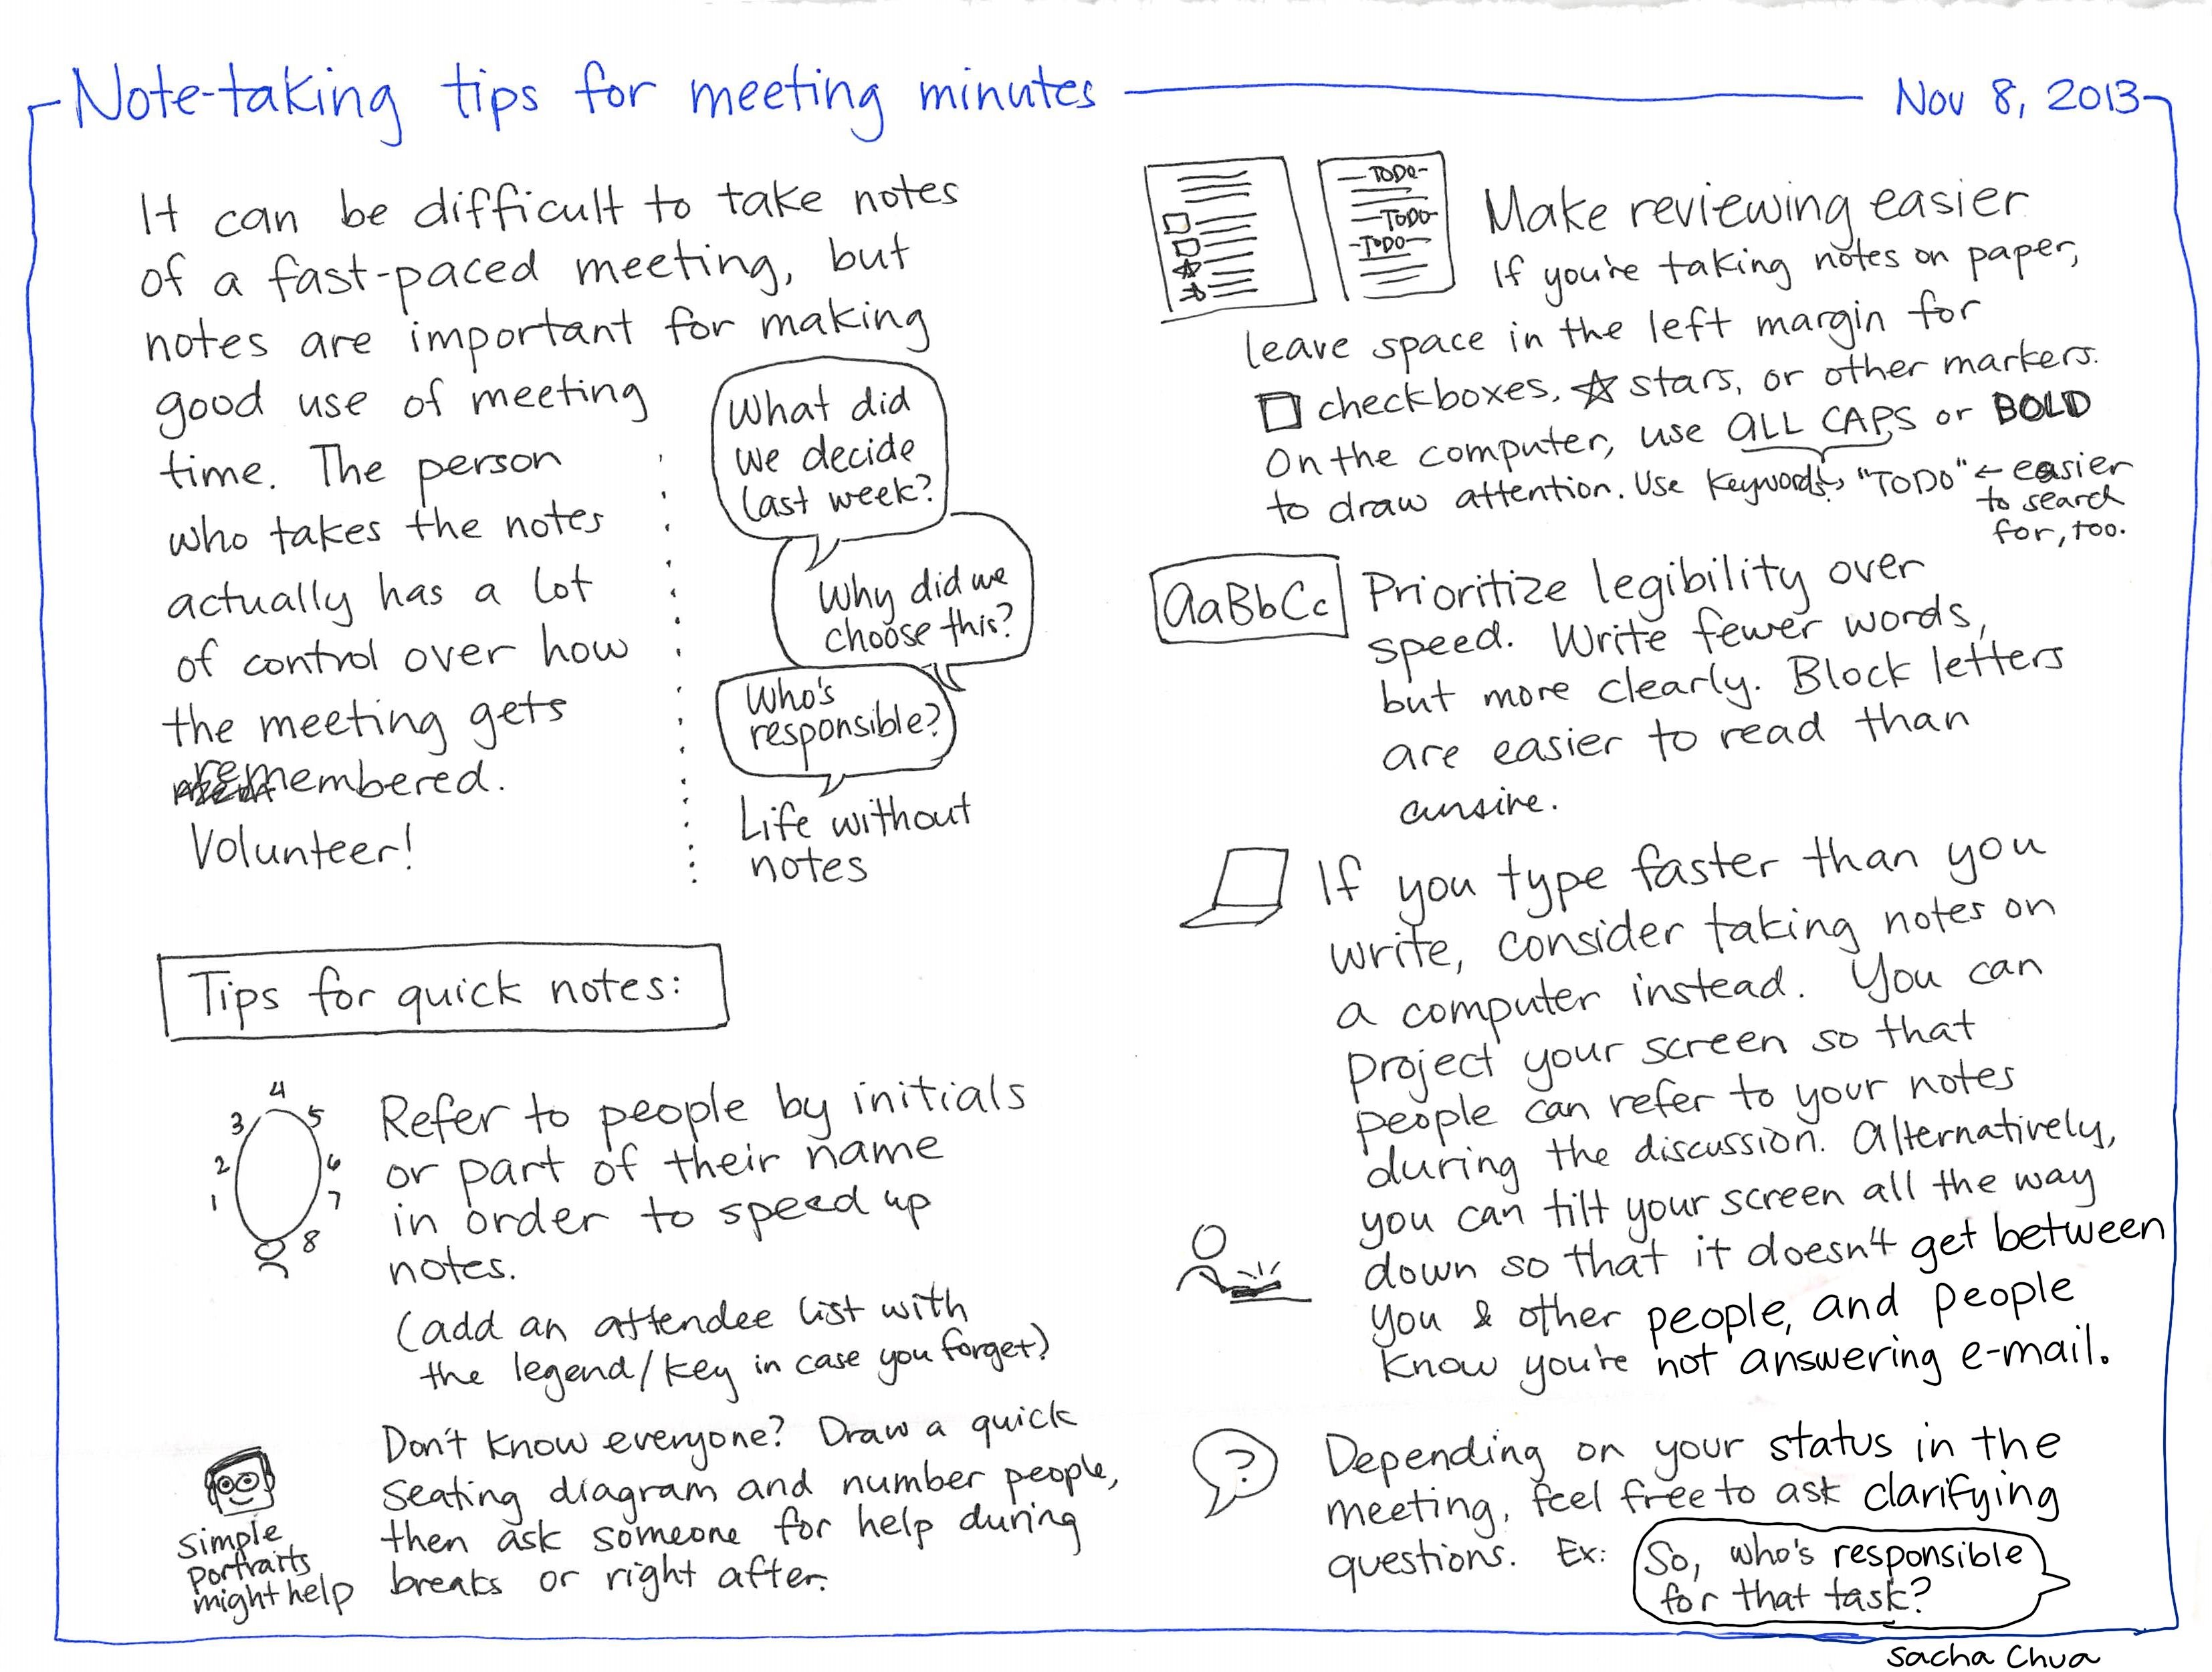 rock-those-meeting-minutes